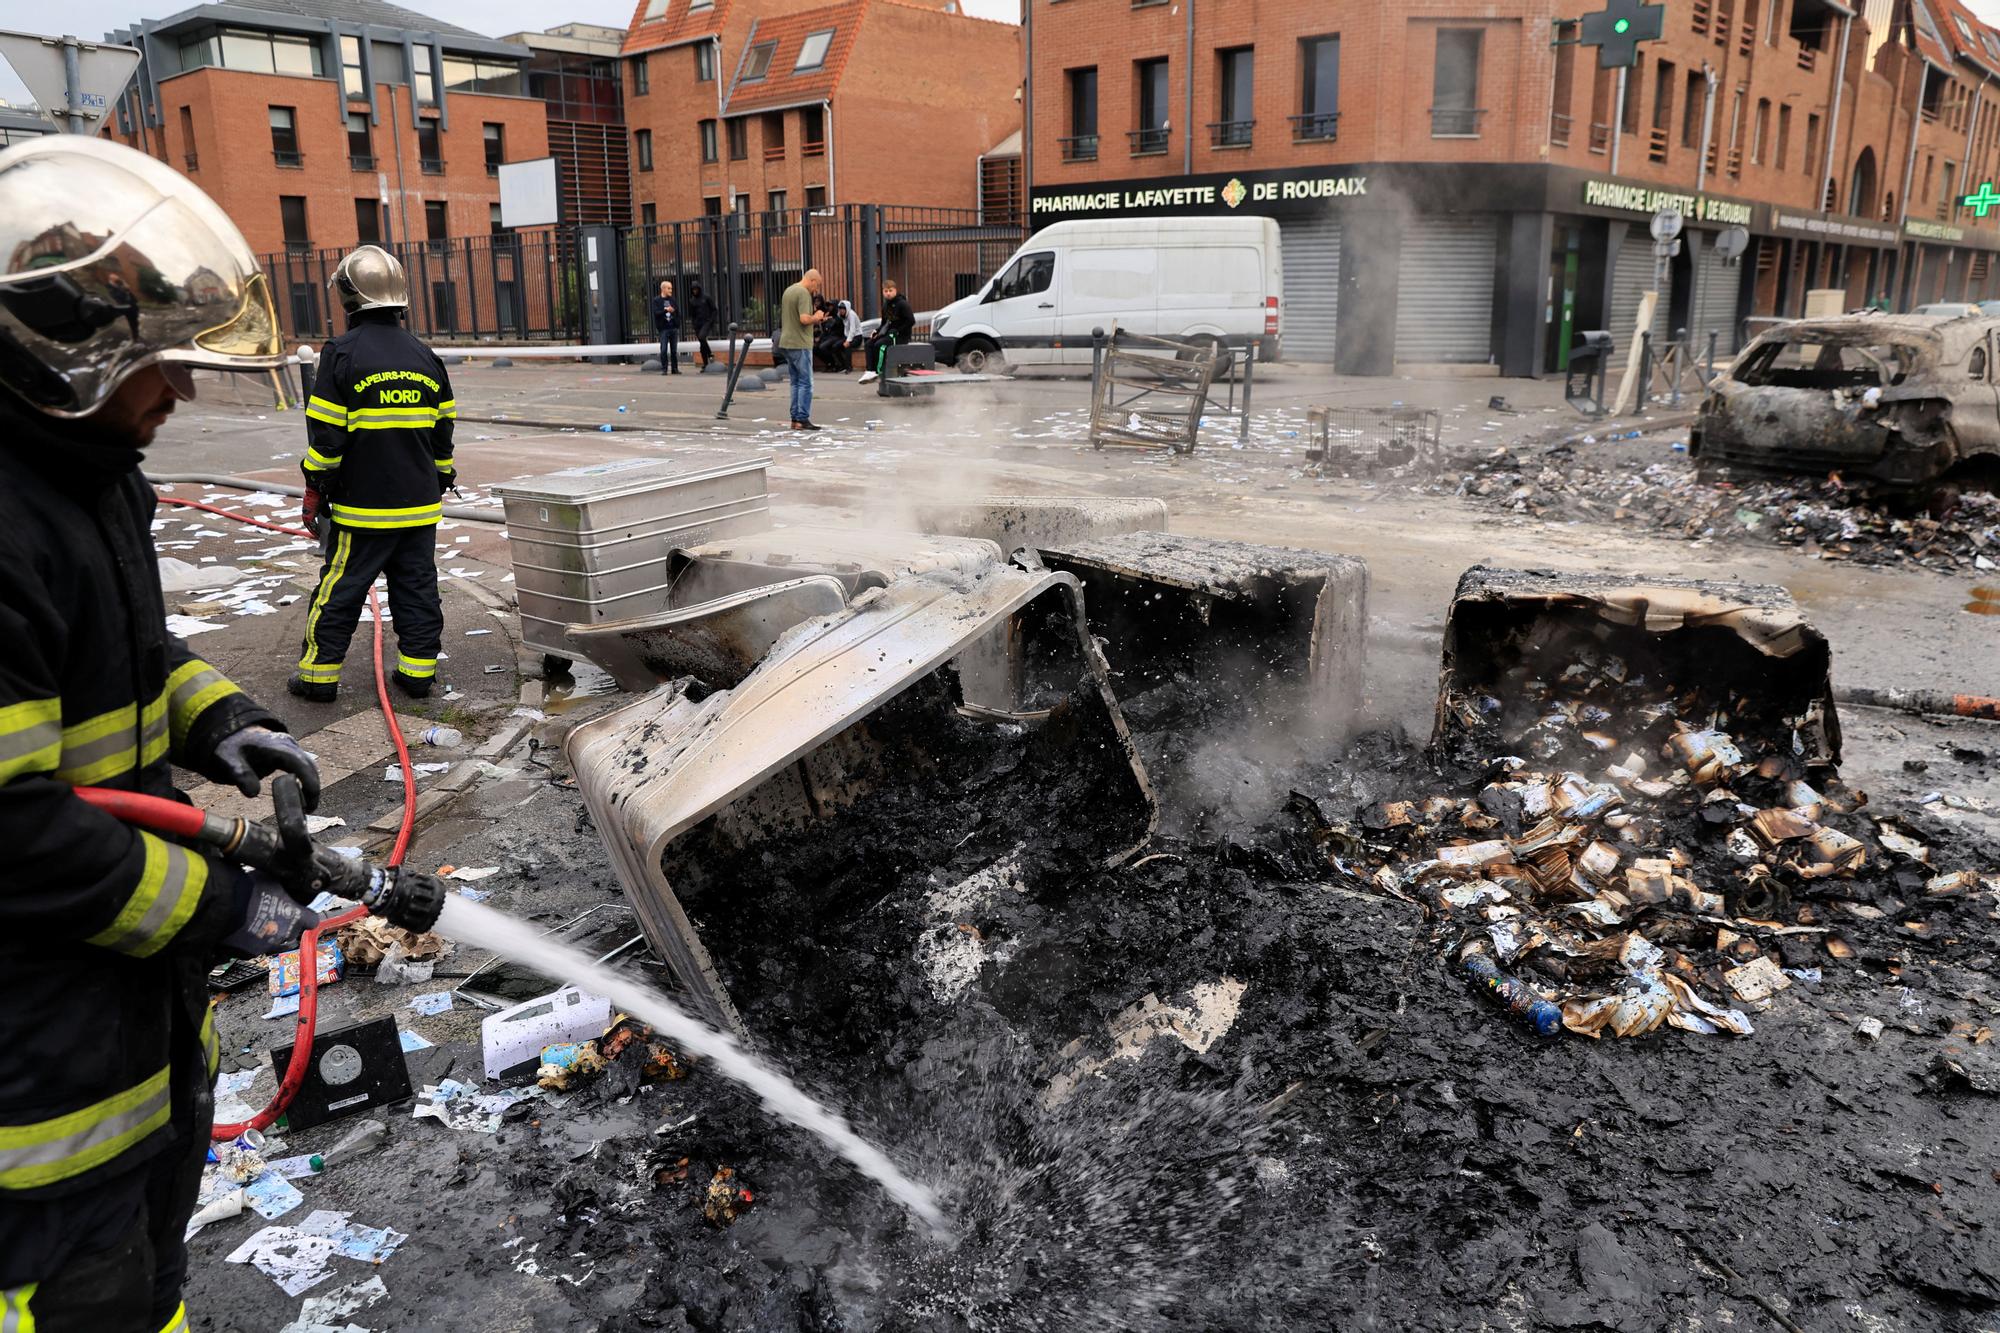 Aftermath after a third night of riots between protesters and police in France